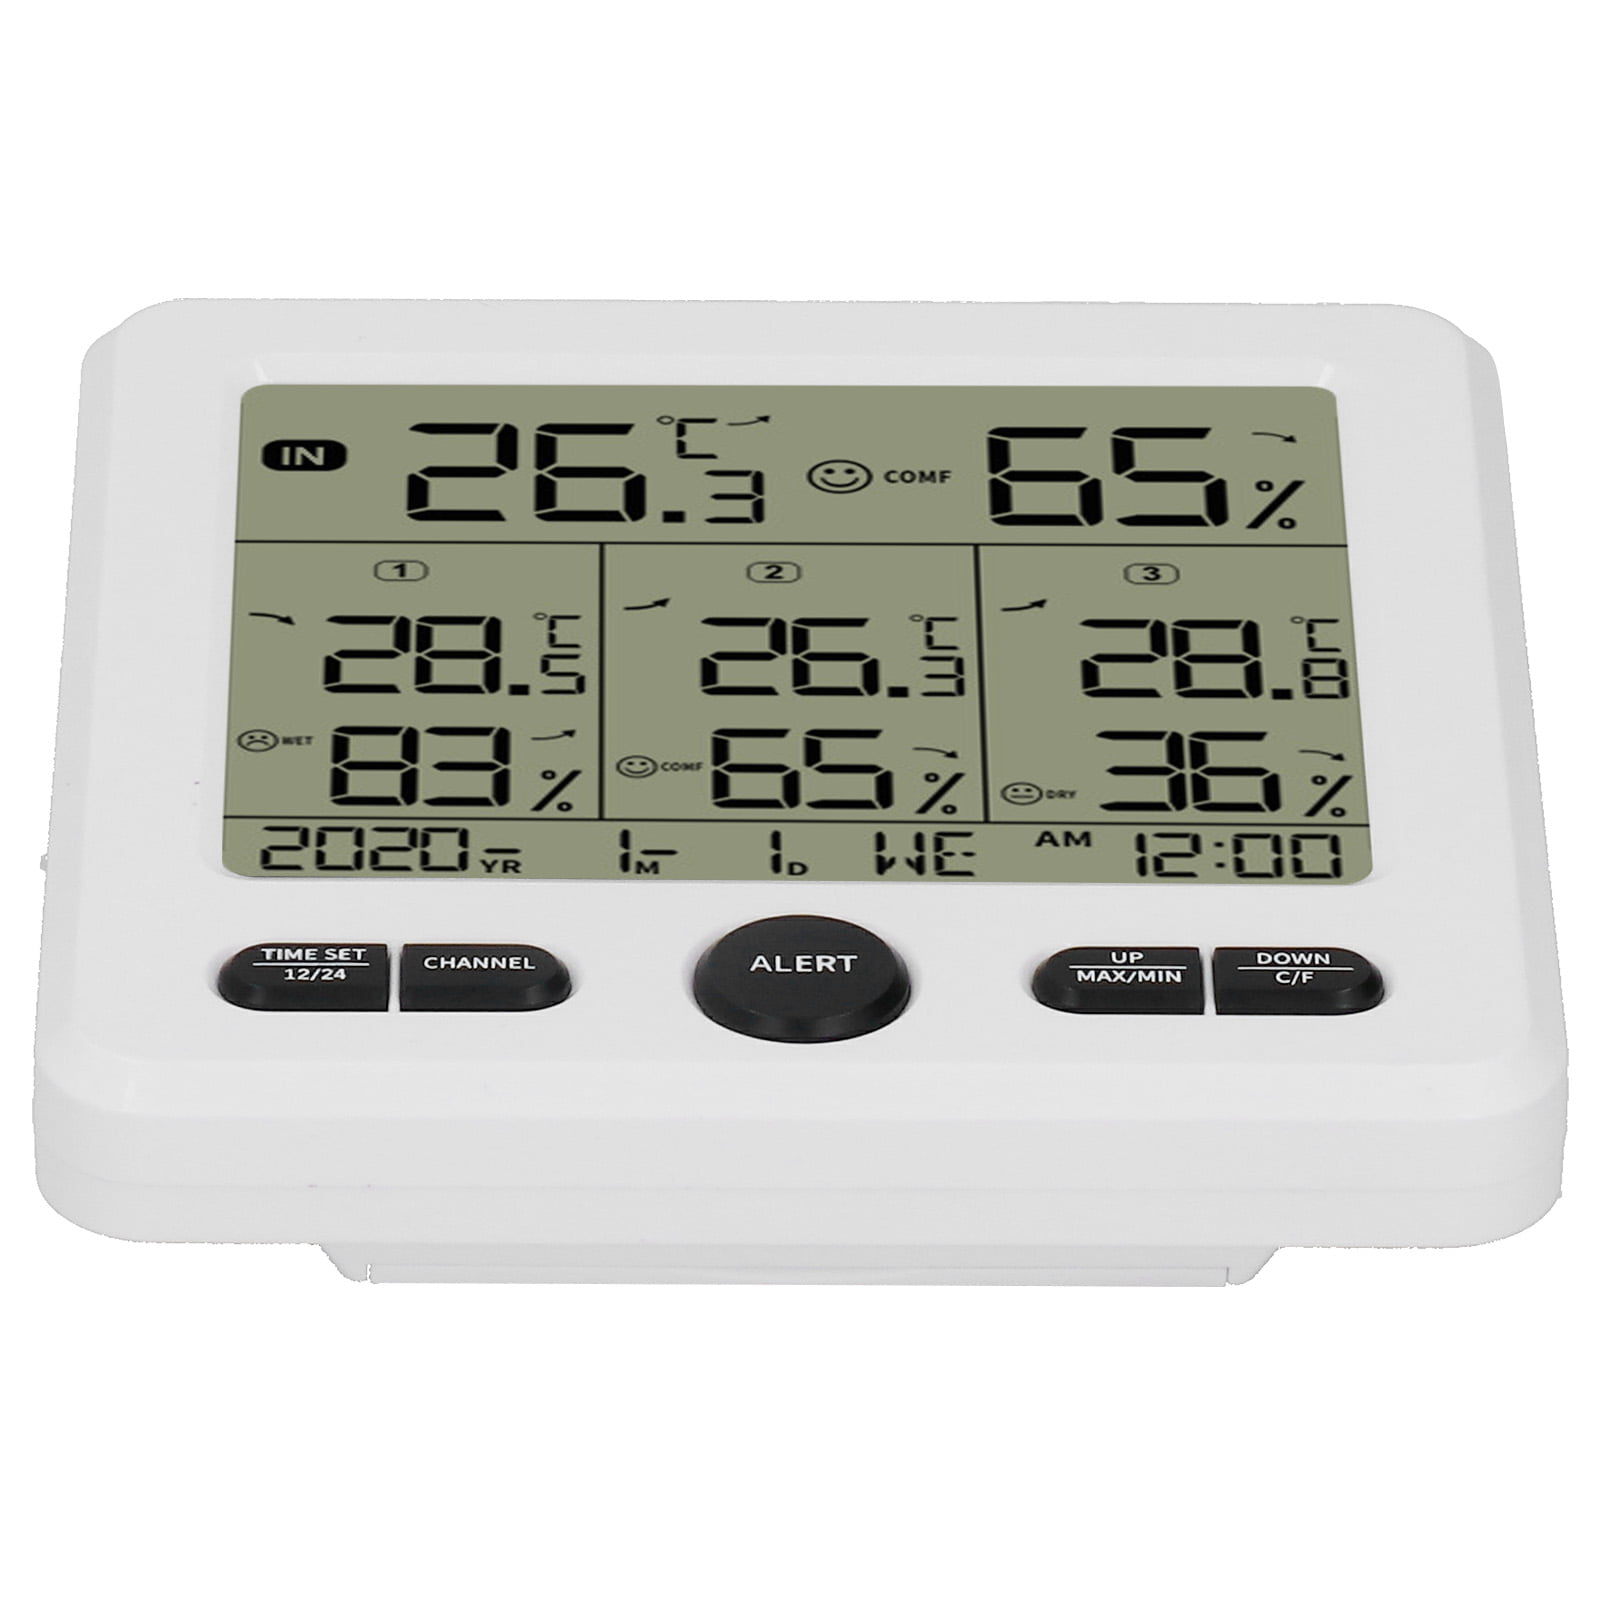 Weather Station Wireless Indoor Outdoor Thermometer TS-6210 Digital  Temperature Hygrometer With 3pcs Remote Sensors Smart Home